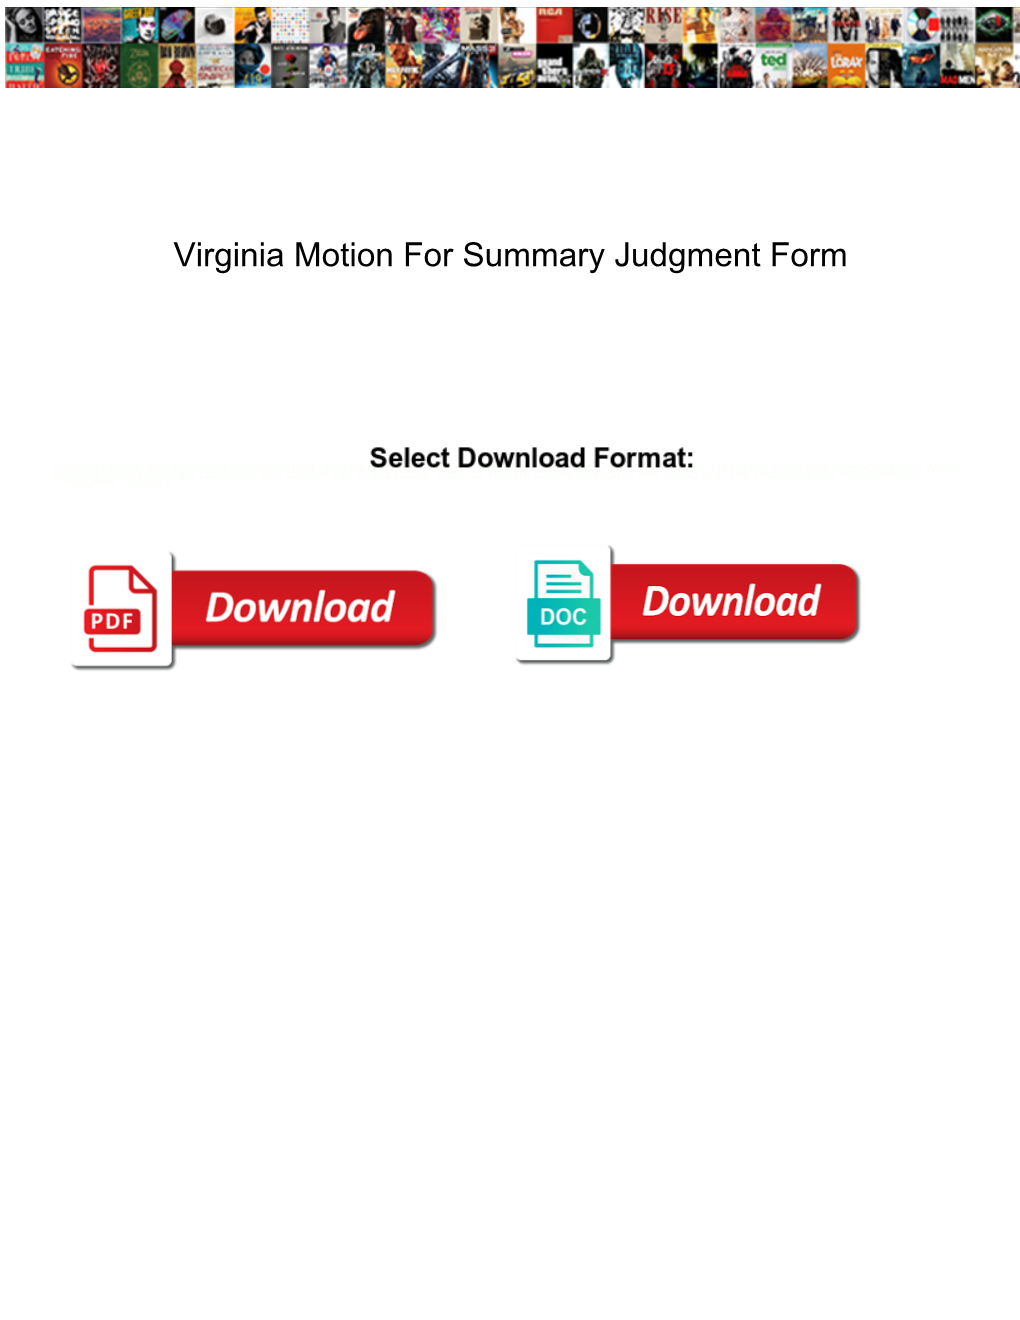 Virginia Motion for Summary Judgment Form